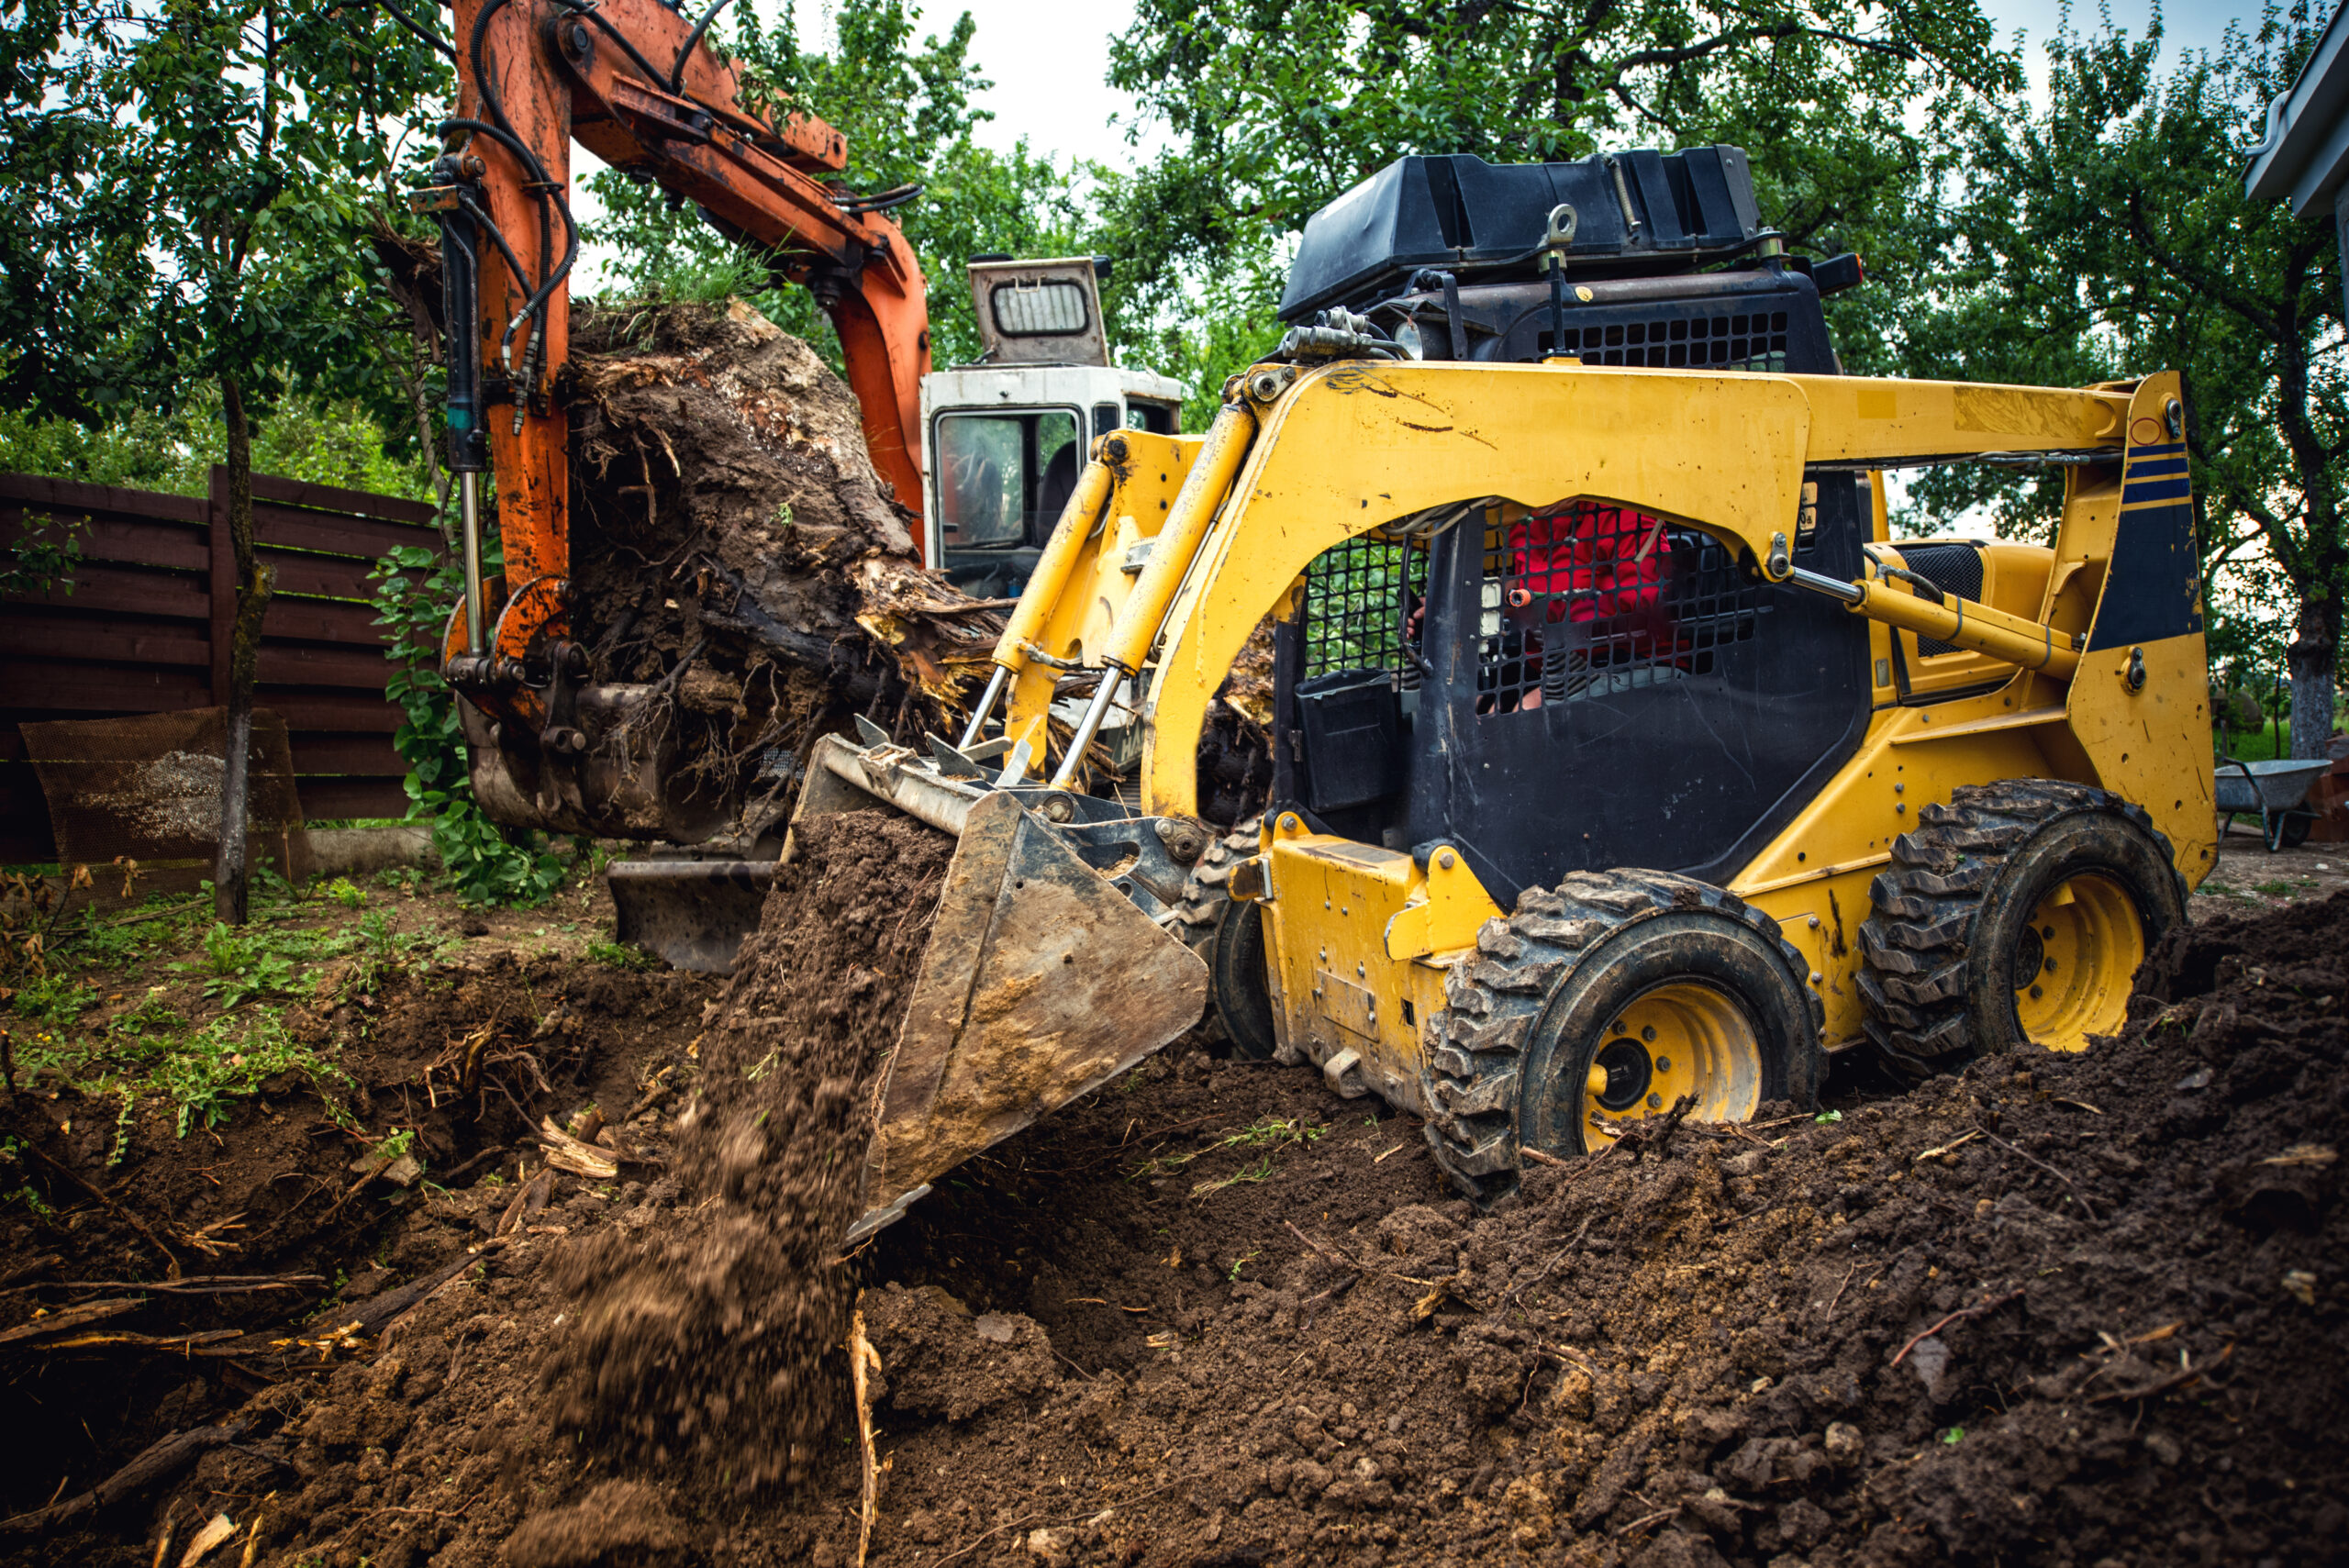 Ensuring safety in landscaping with excavators is paramount, requiring proper training and precautions to prevent accidents and protect workers.